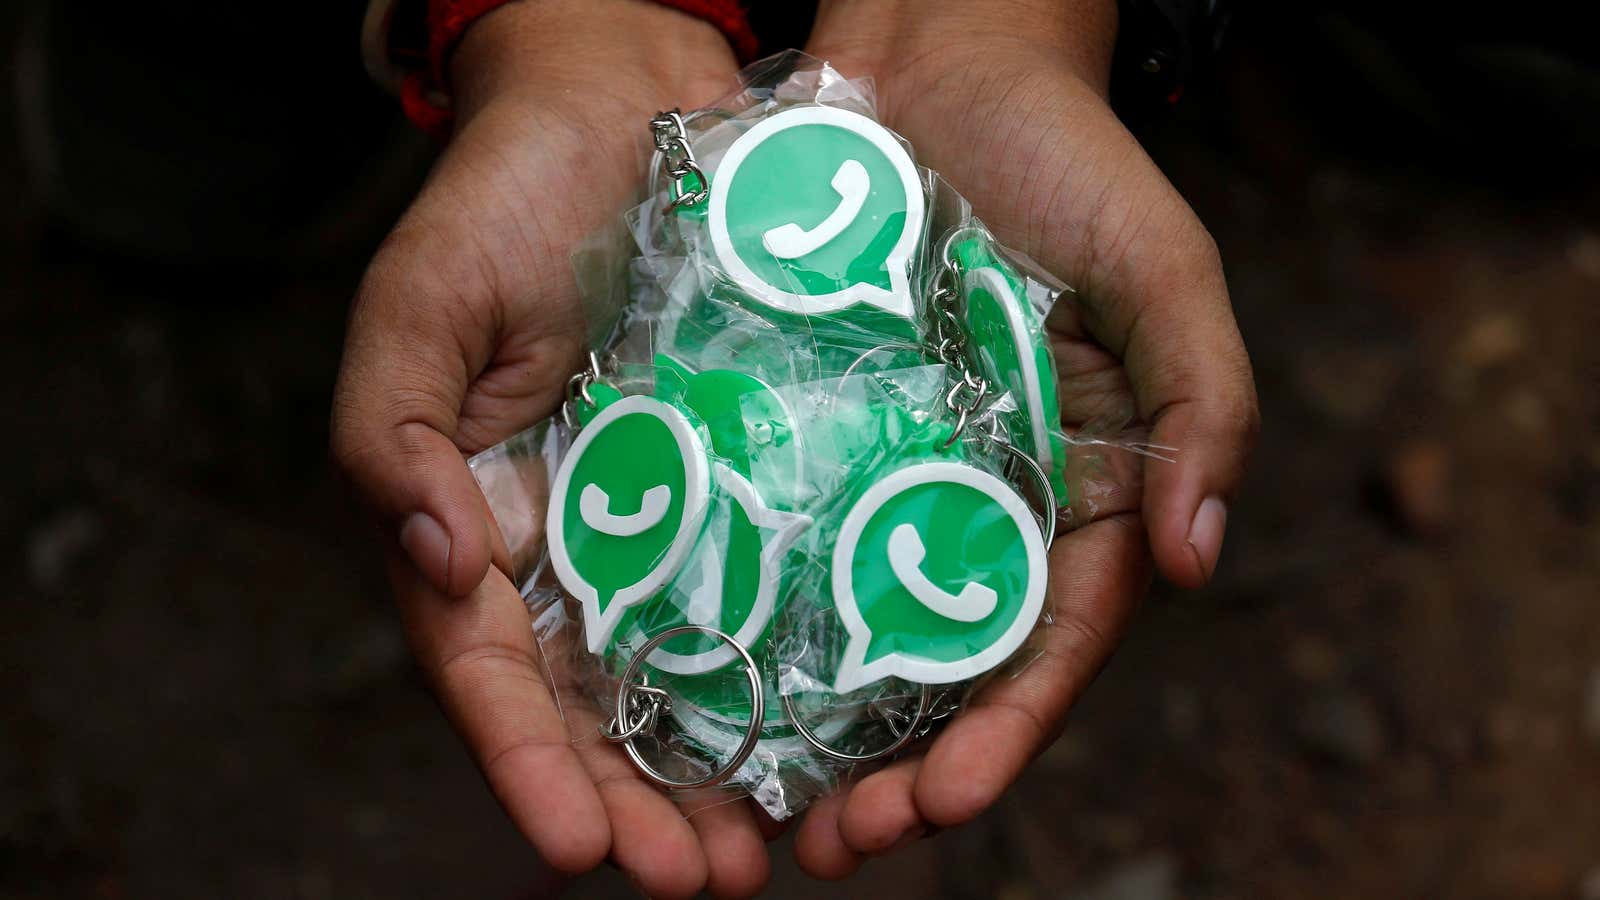 A WhatsApp-Reliance Jio representative displays key chains with the logo of WhatsApp for distribution during a drive by the two companies to educate users, on…